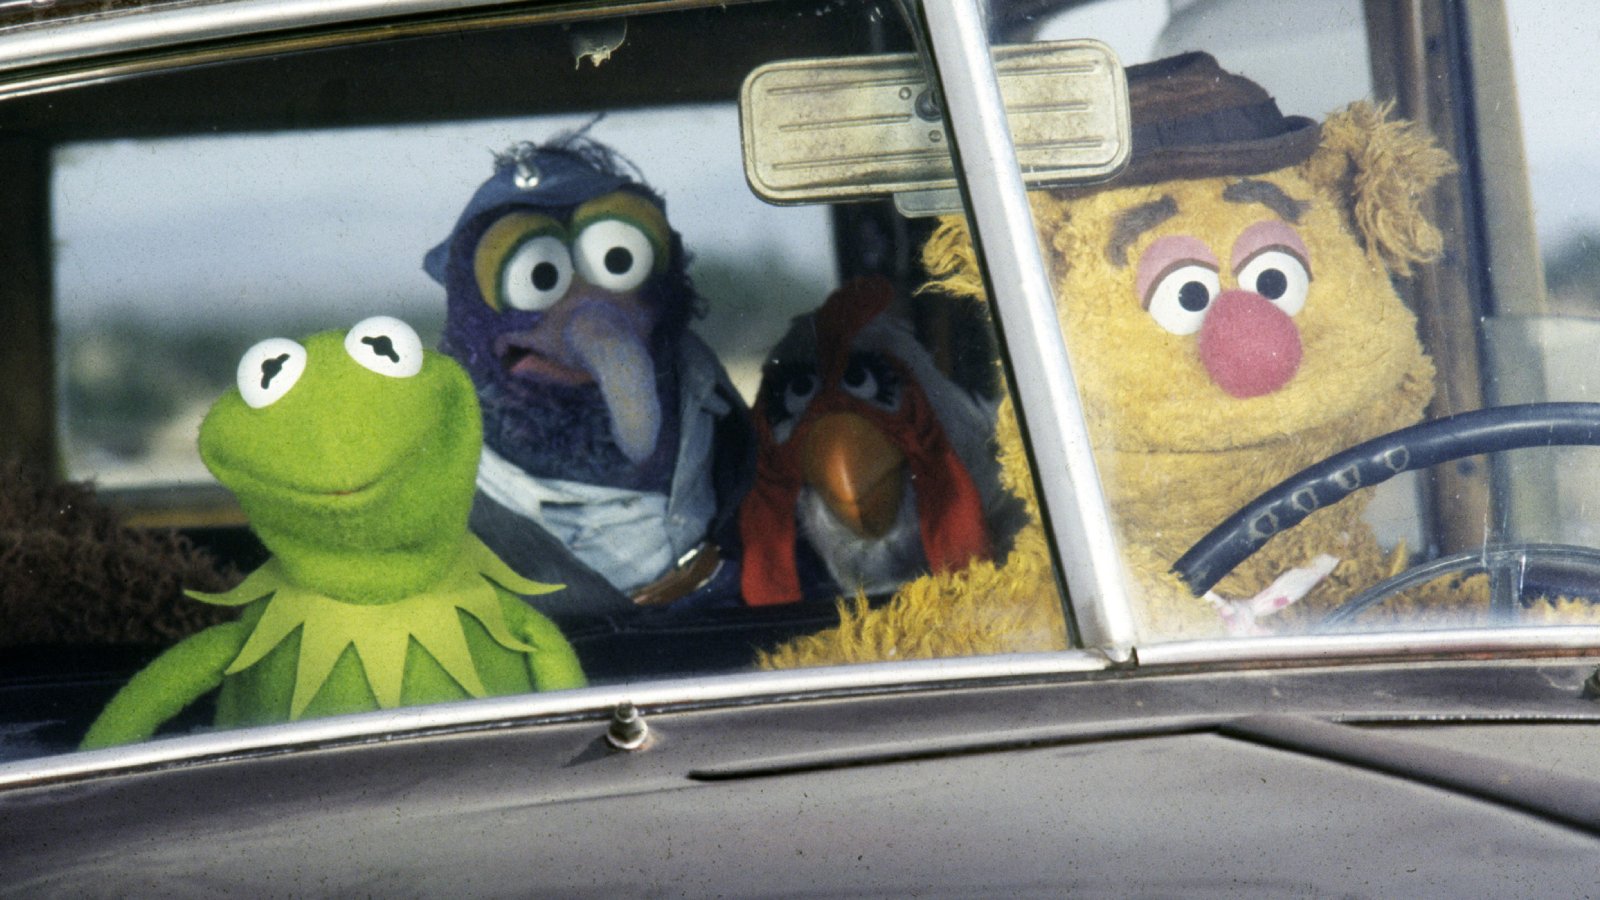 The characters Kermit, Gonzo, Camilla, and Fozzy, who are all puppets, are in a car.